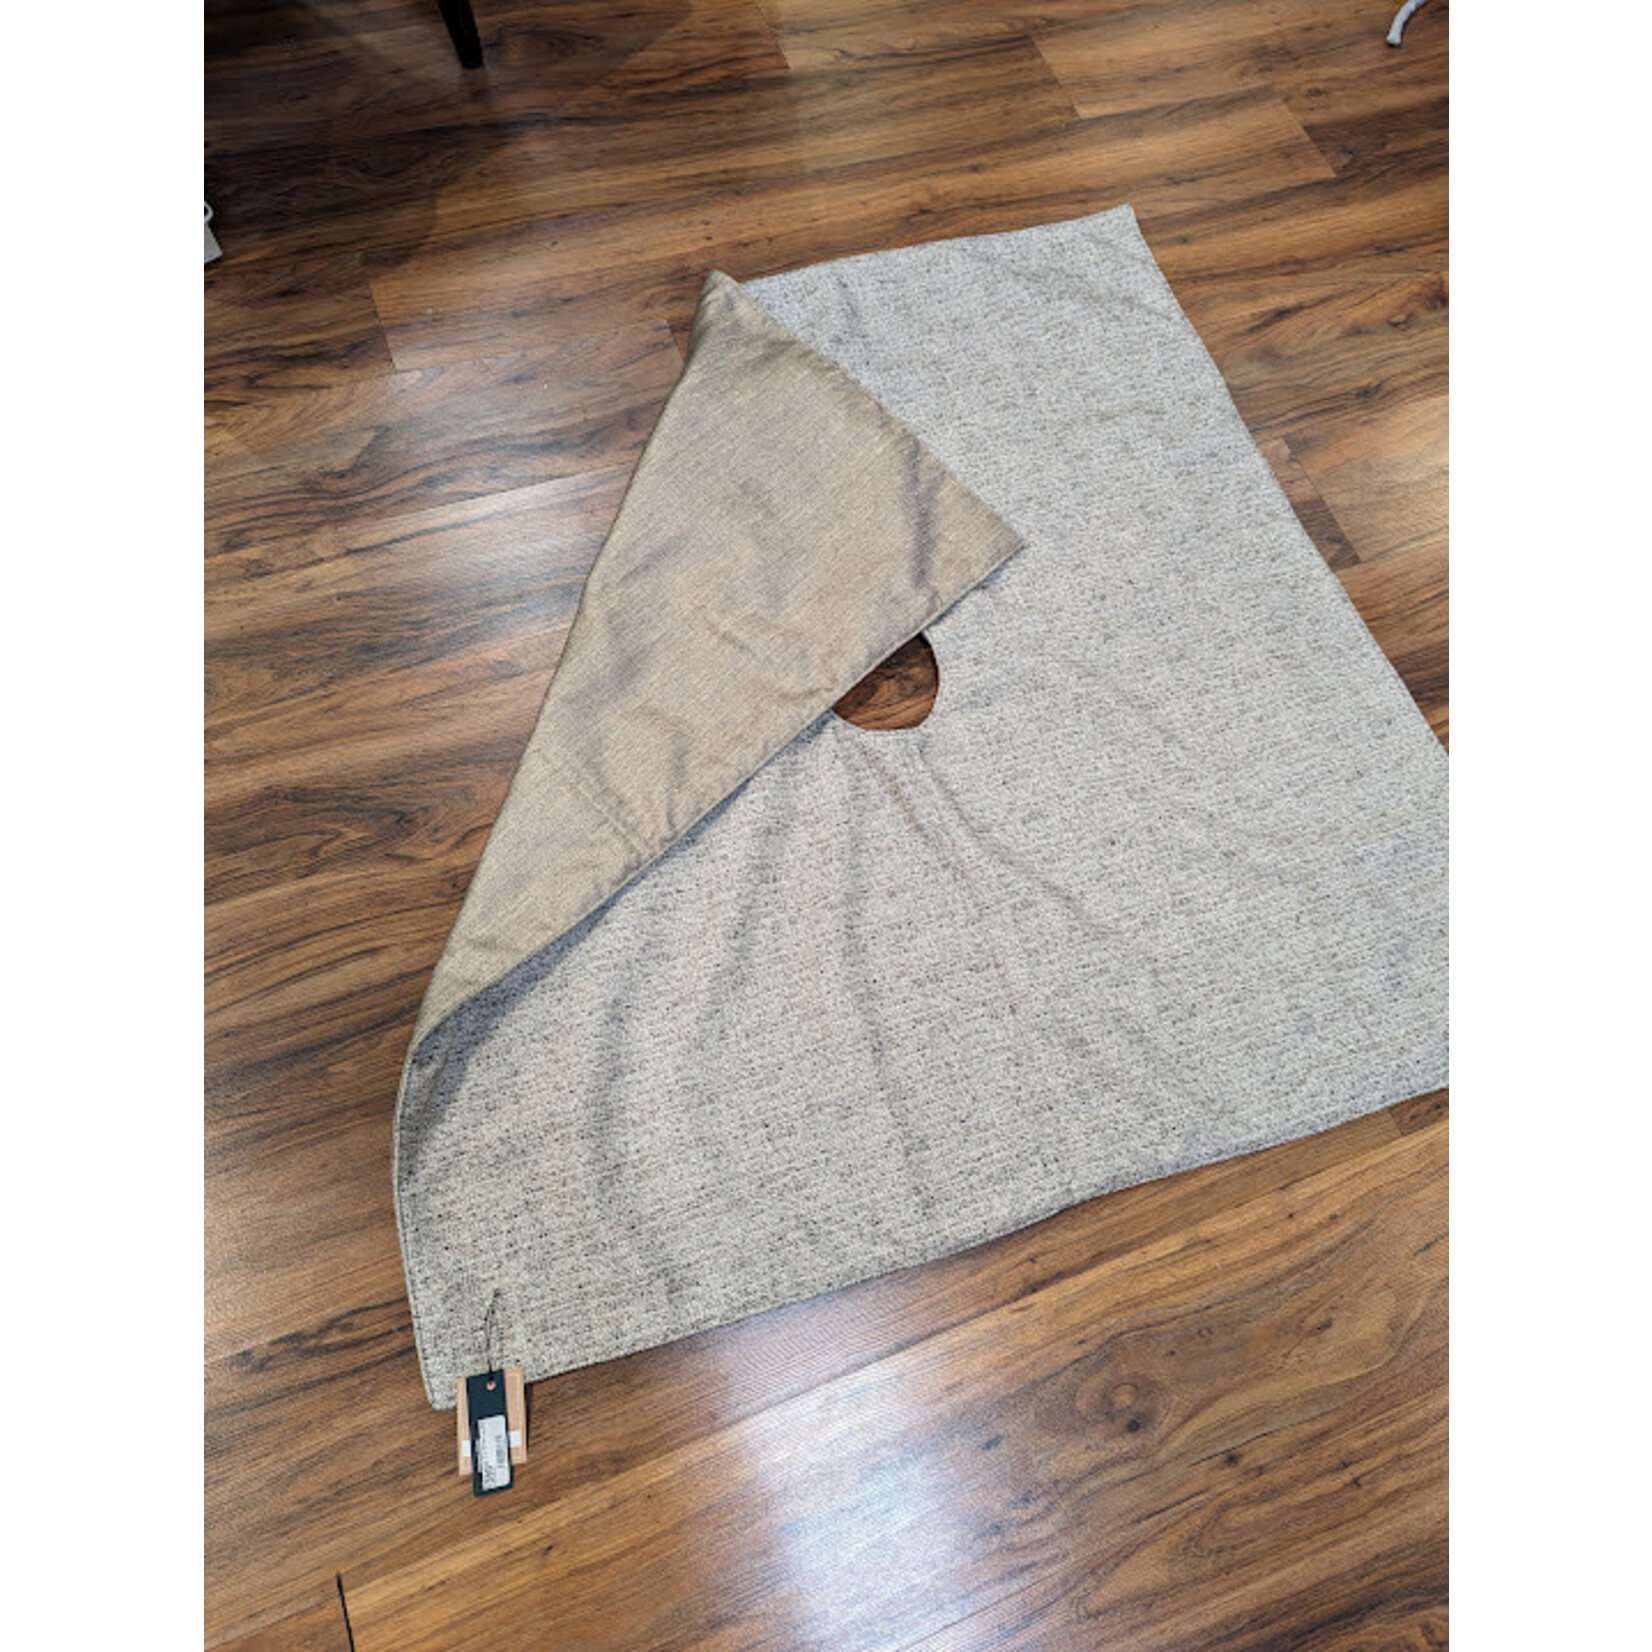 Nicky's Notions Gray Square Tree Skirt Reversible